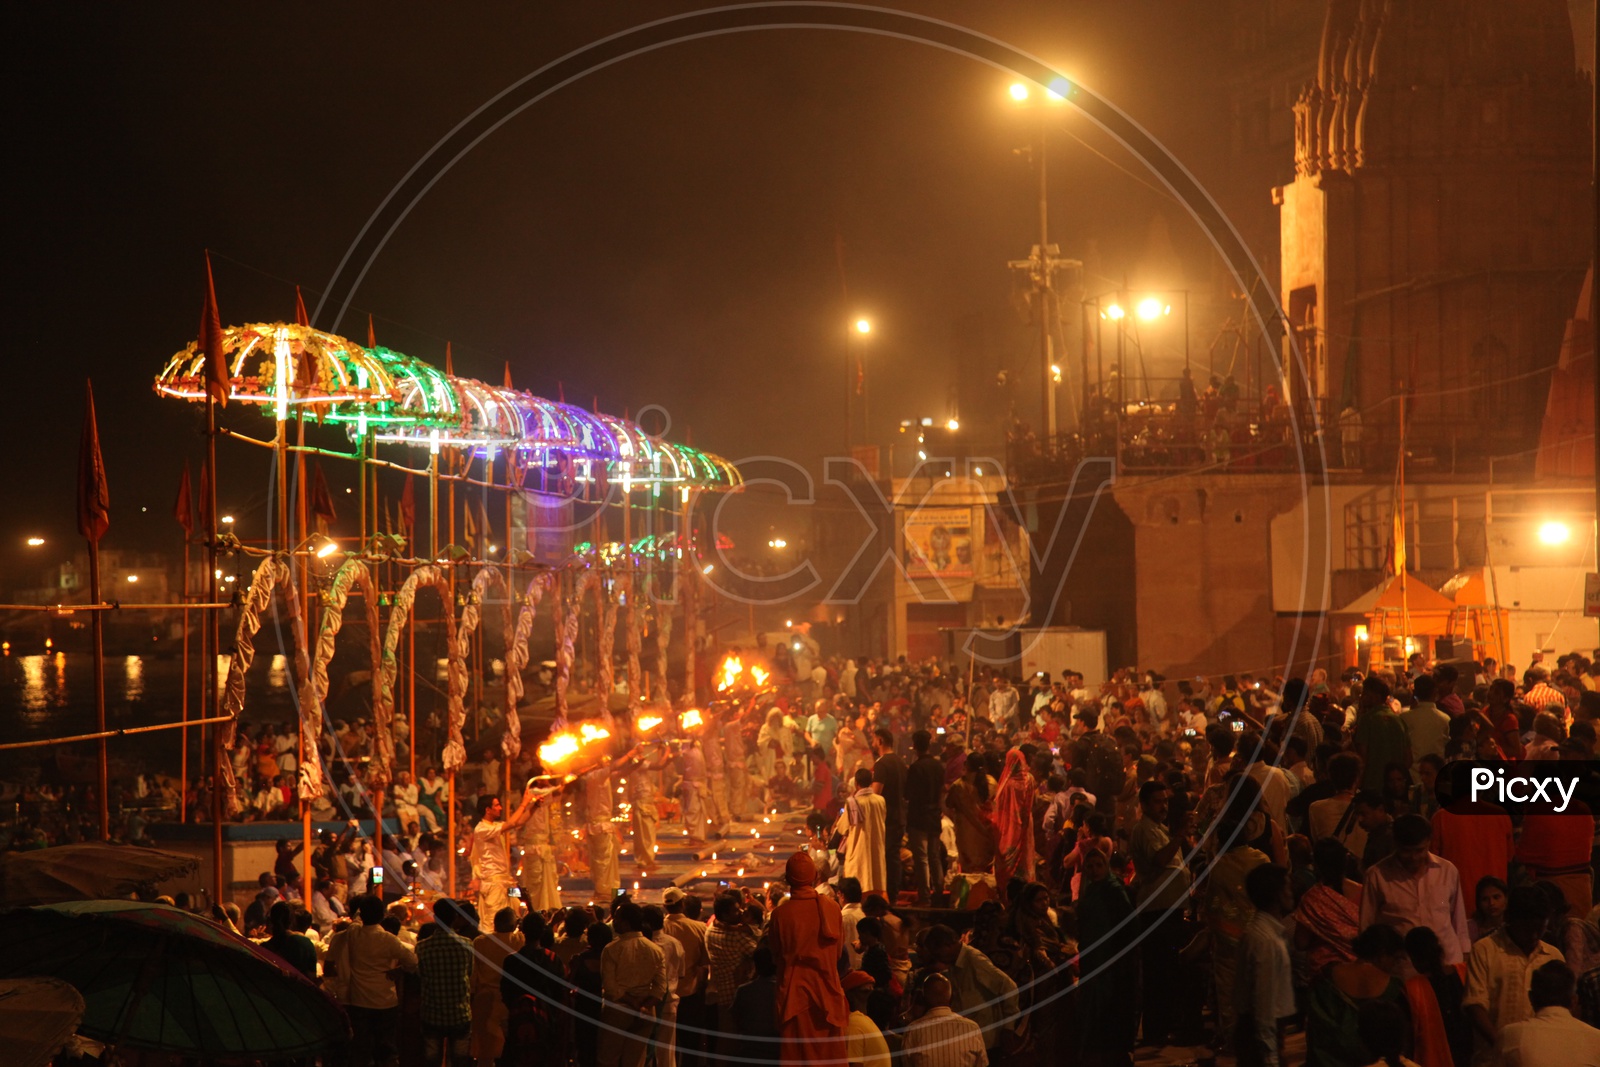 Devotees witnessing the Ganga Aarti performed by priests at Ganges river bank